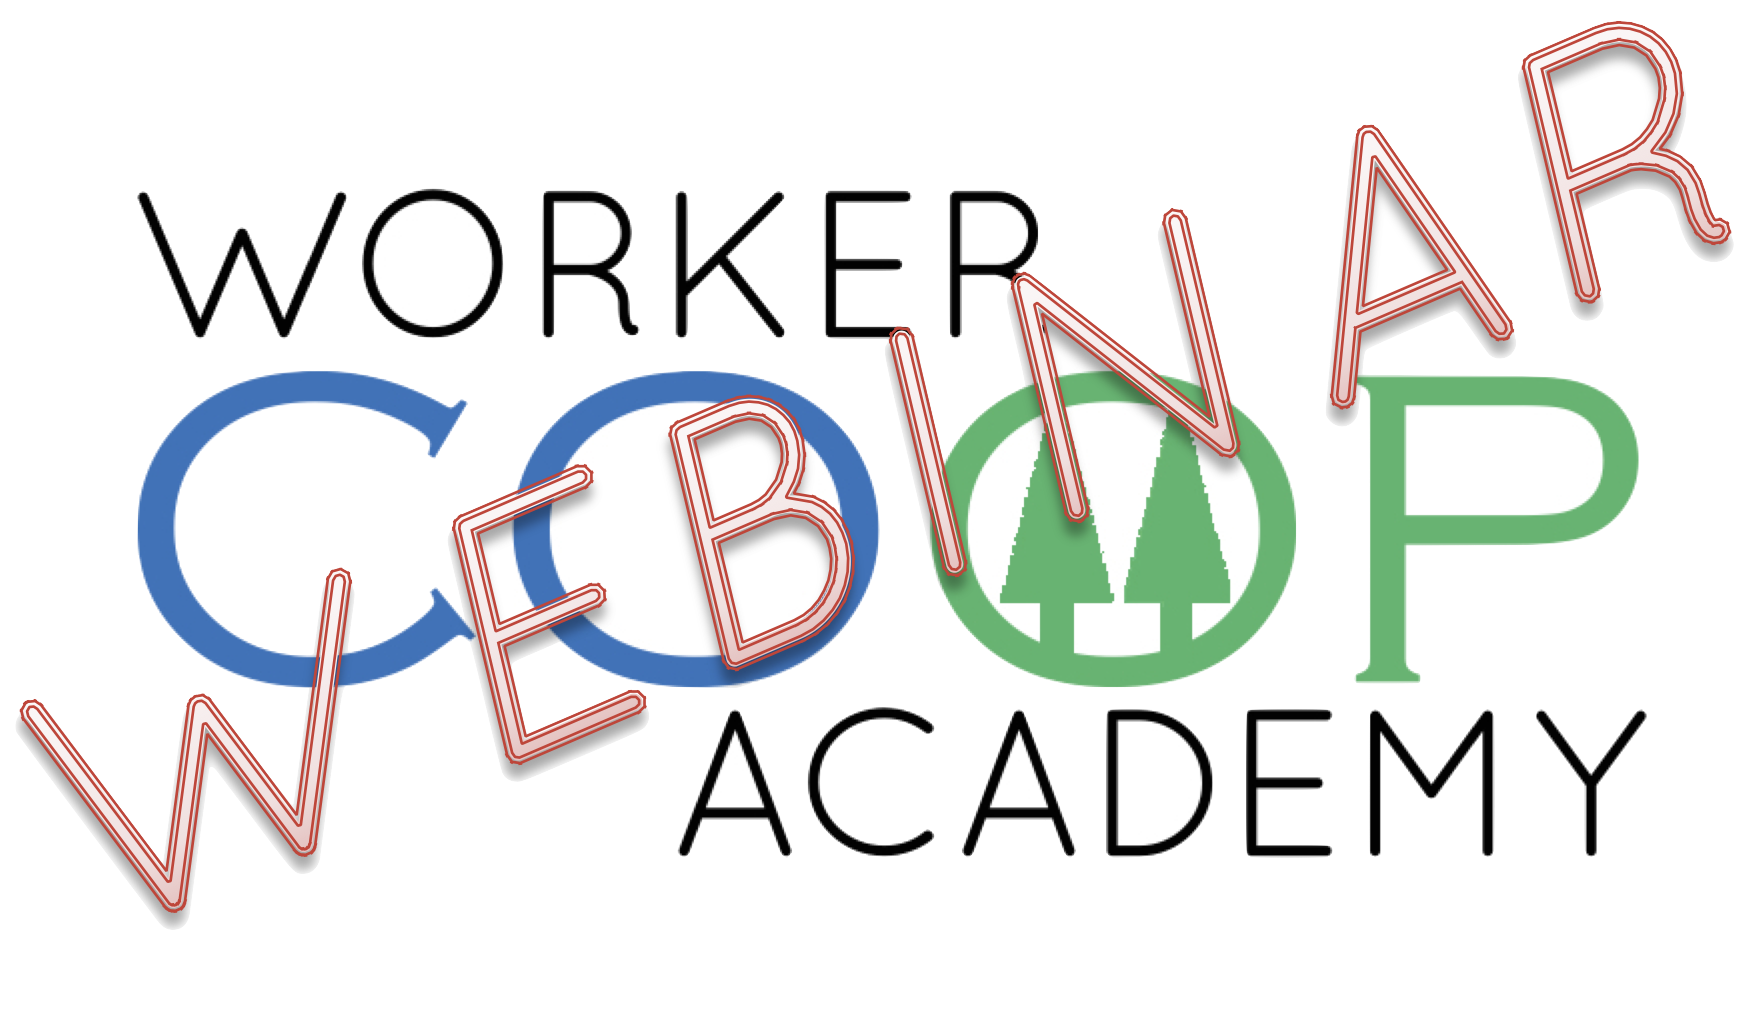 Want to know more about the Worker Coop Academy? Join us on ourwebinar on May 13th for a lunch time webinar!